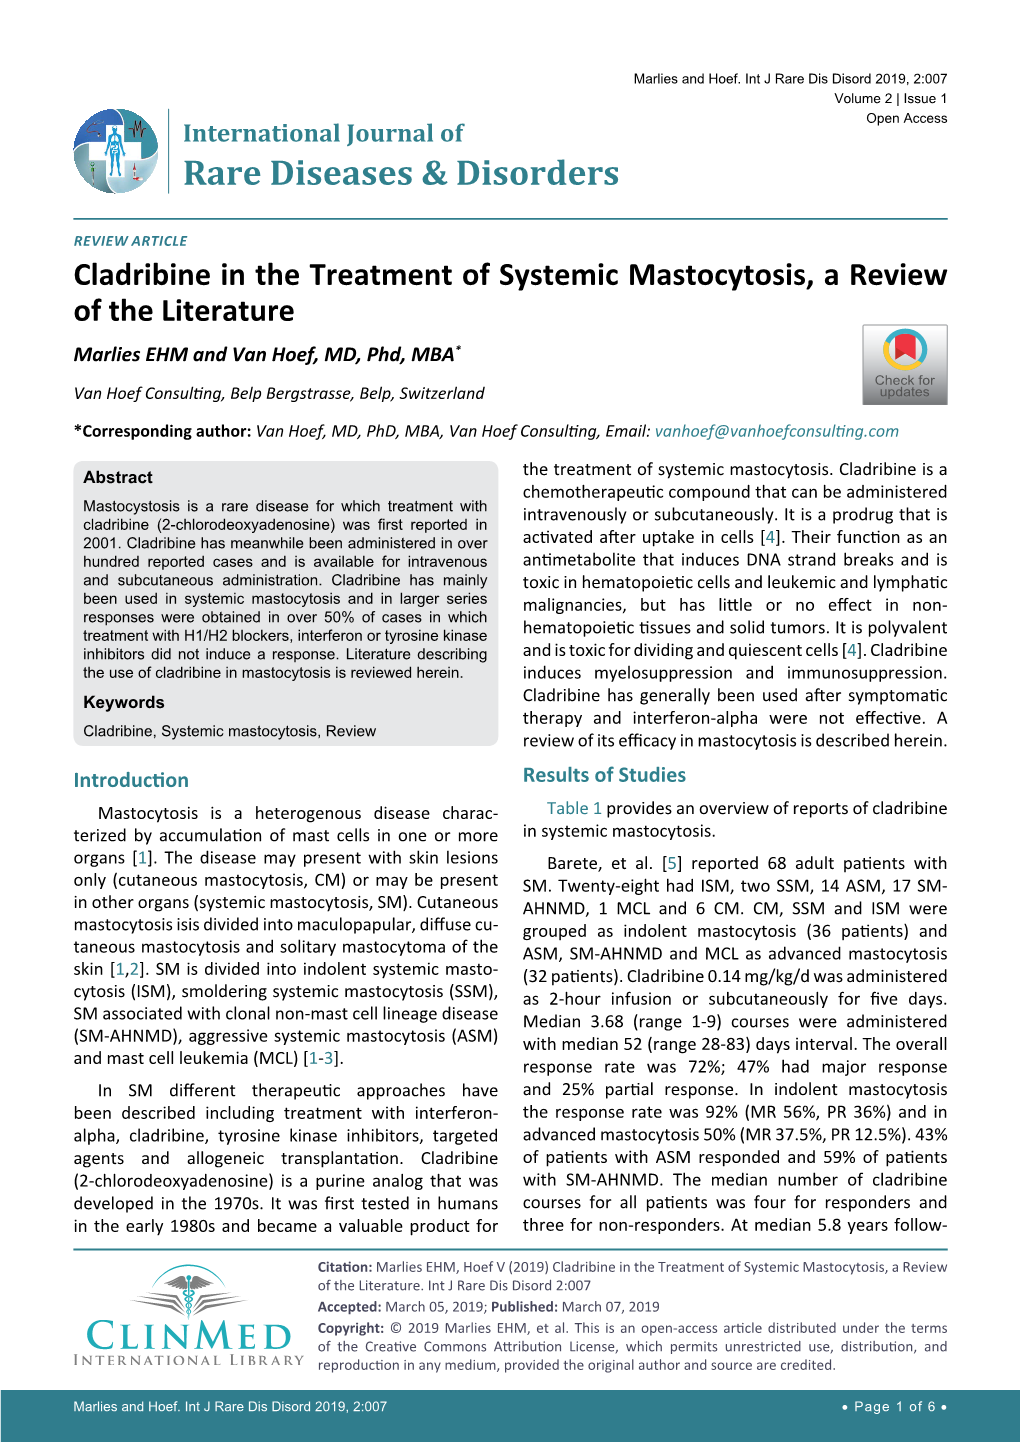 Cladribine in the Treatment of Systemic Mastocytosis, a Review Of